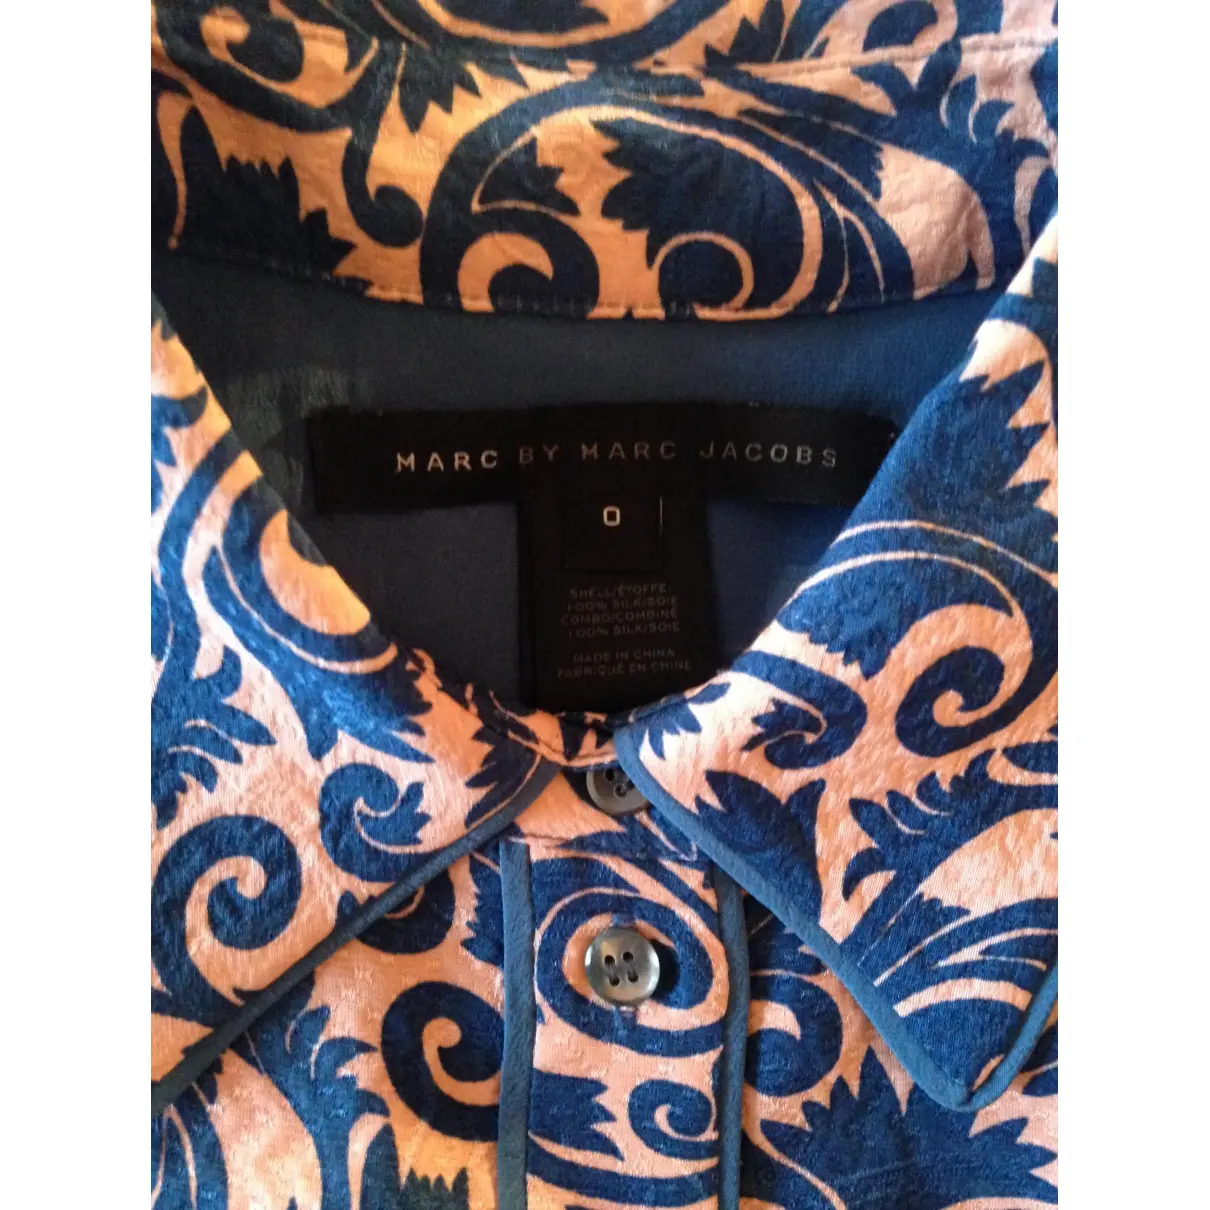 Buy Marc by Marc Jacobs Silk shirt online